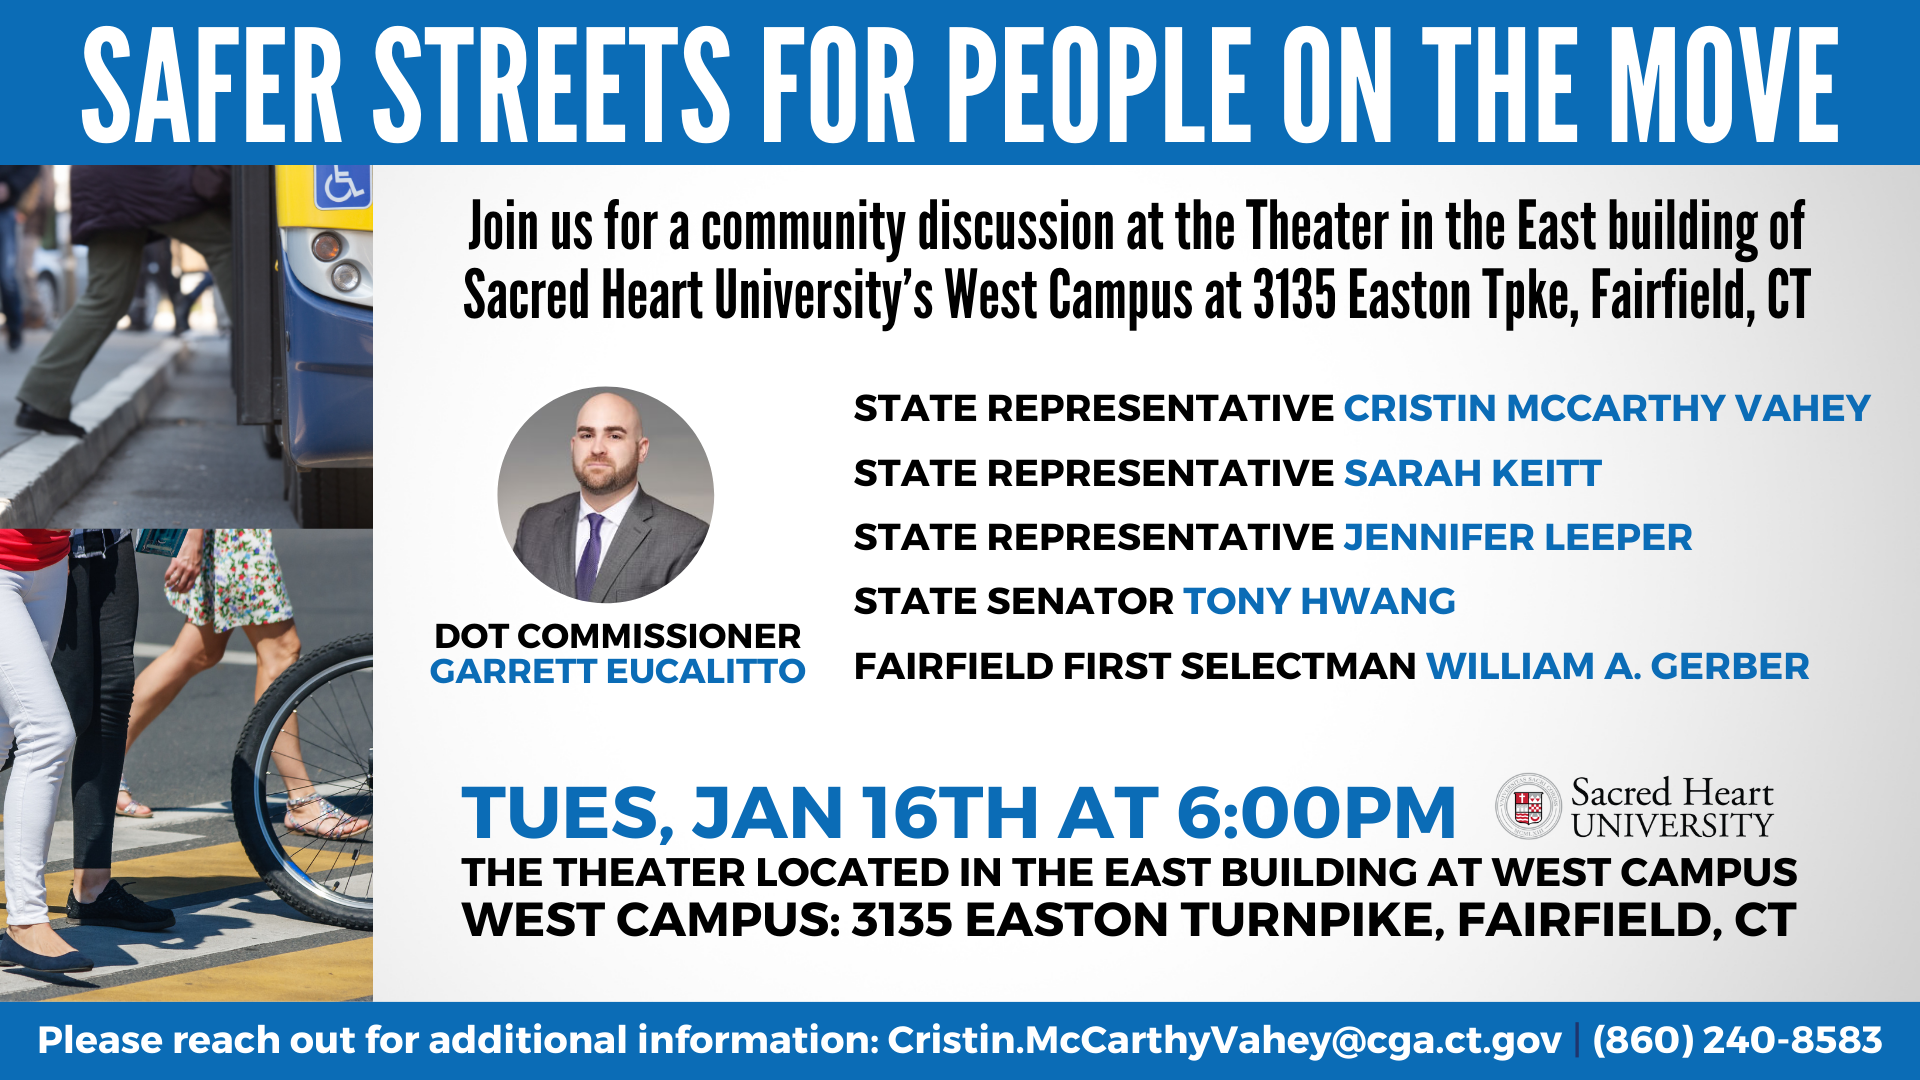 The meeting takes place at SHU on Tuesday, January 16, at 6 p.m.